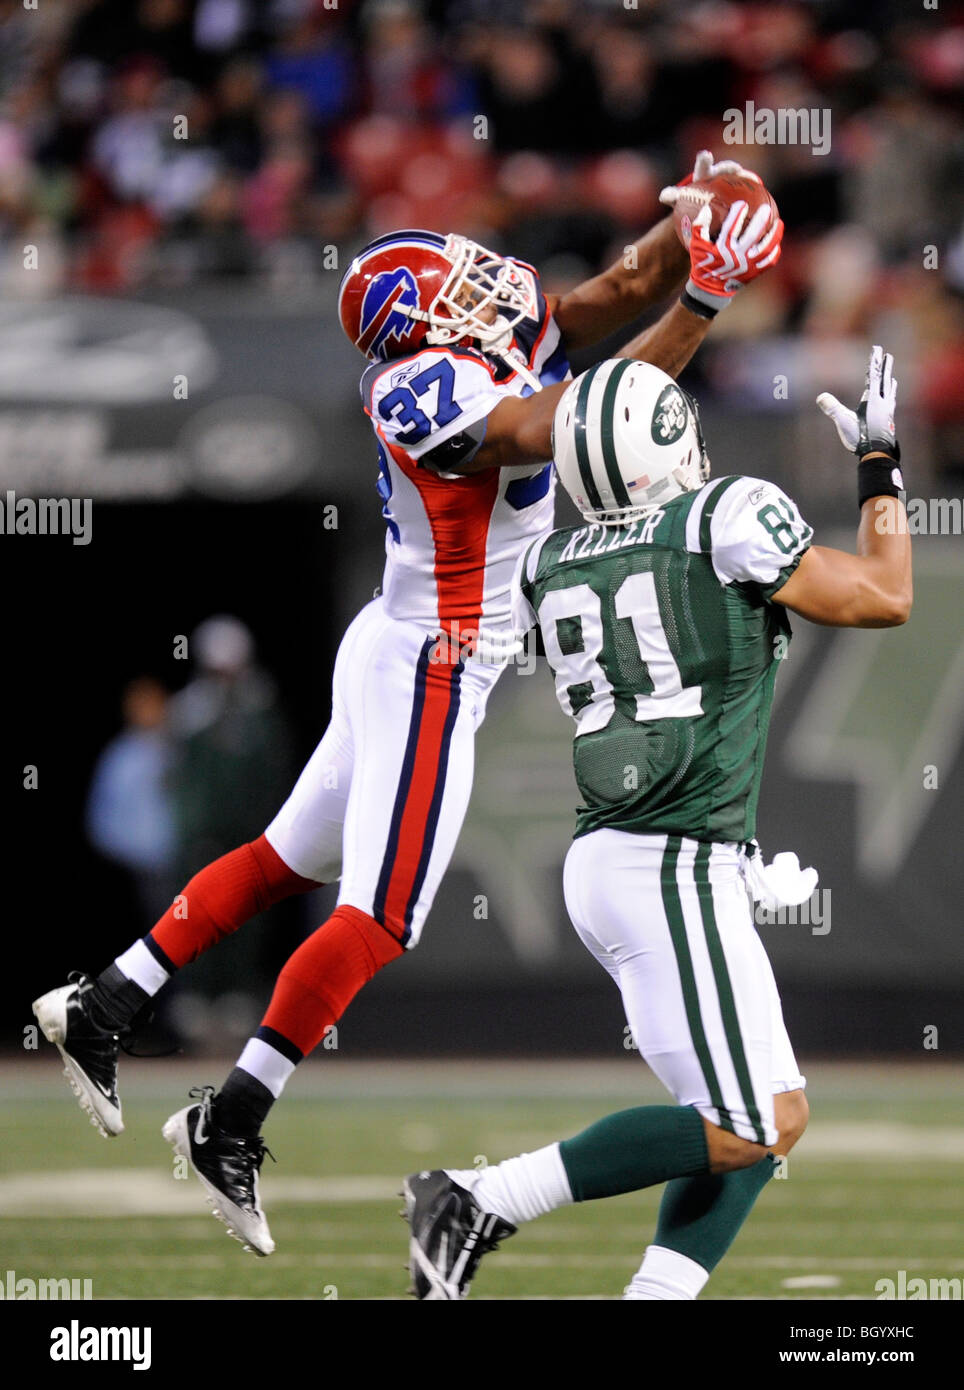 George Wilson #37 of the Buffalo Bills intercepts a pass intended for Dustin Keller #81 of the New York Jets Stock Photo